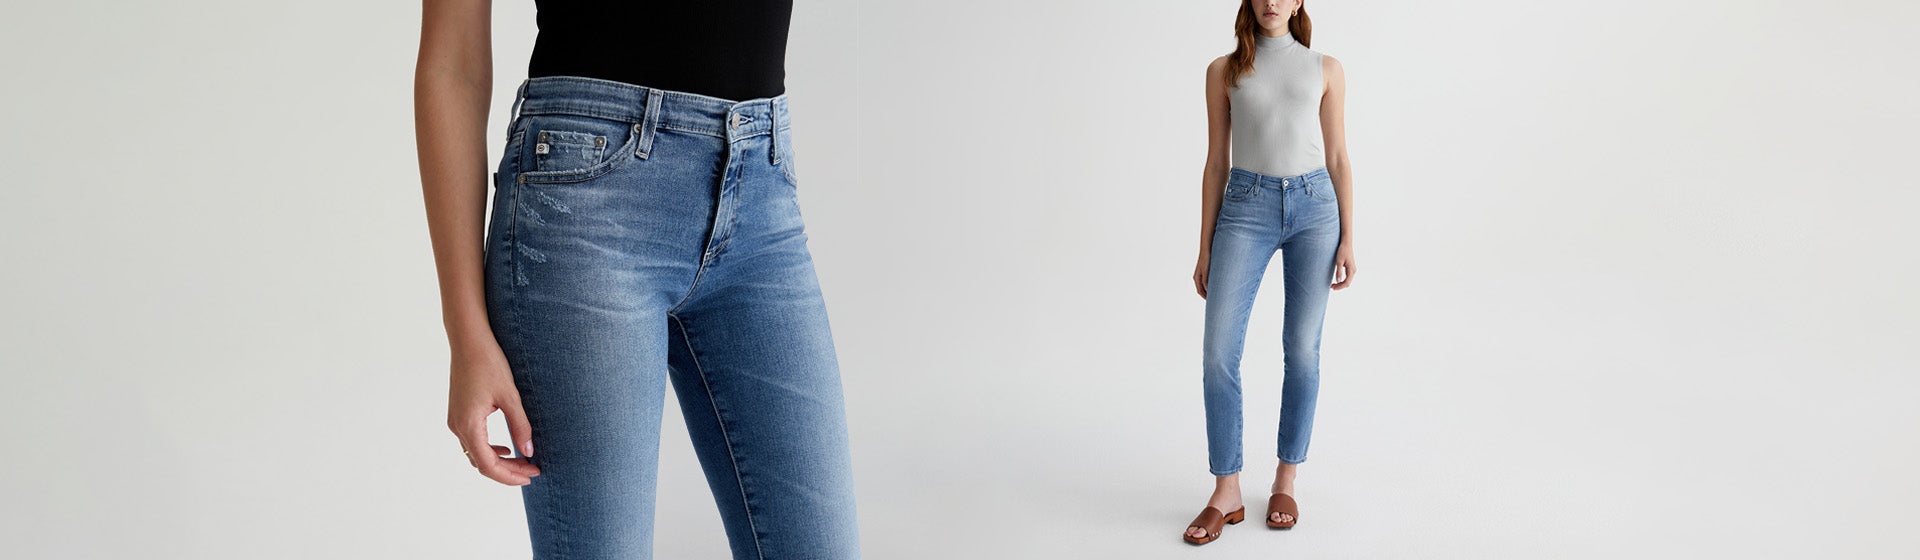 Women's Mid-Rise Jeans and Pants